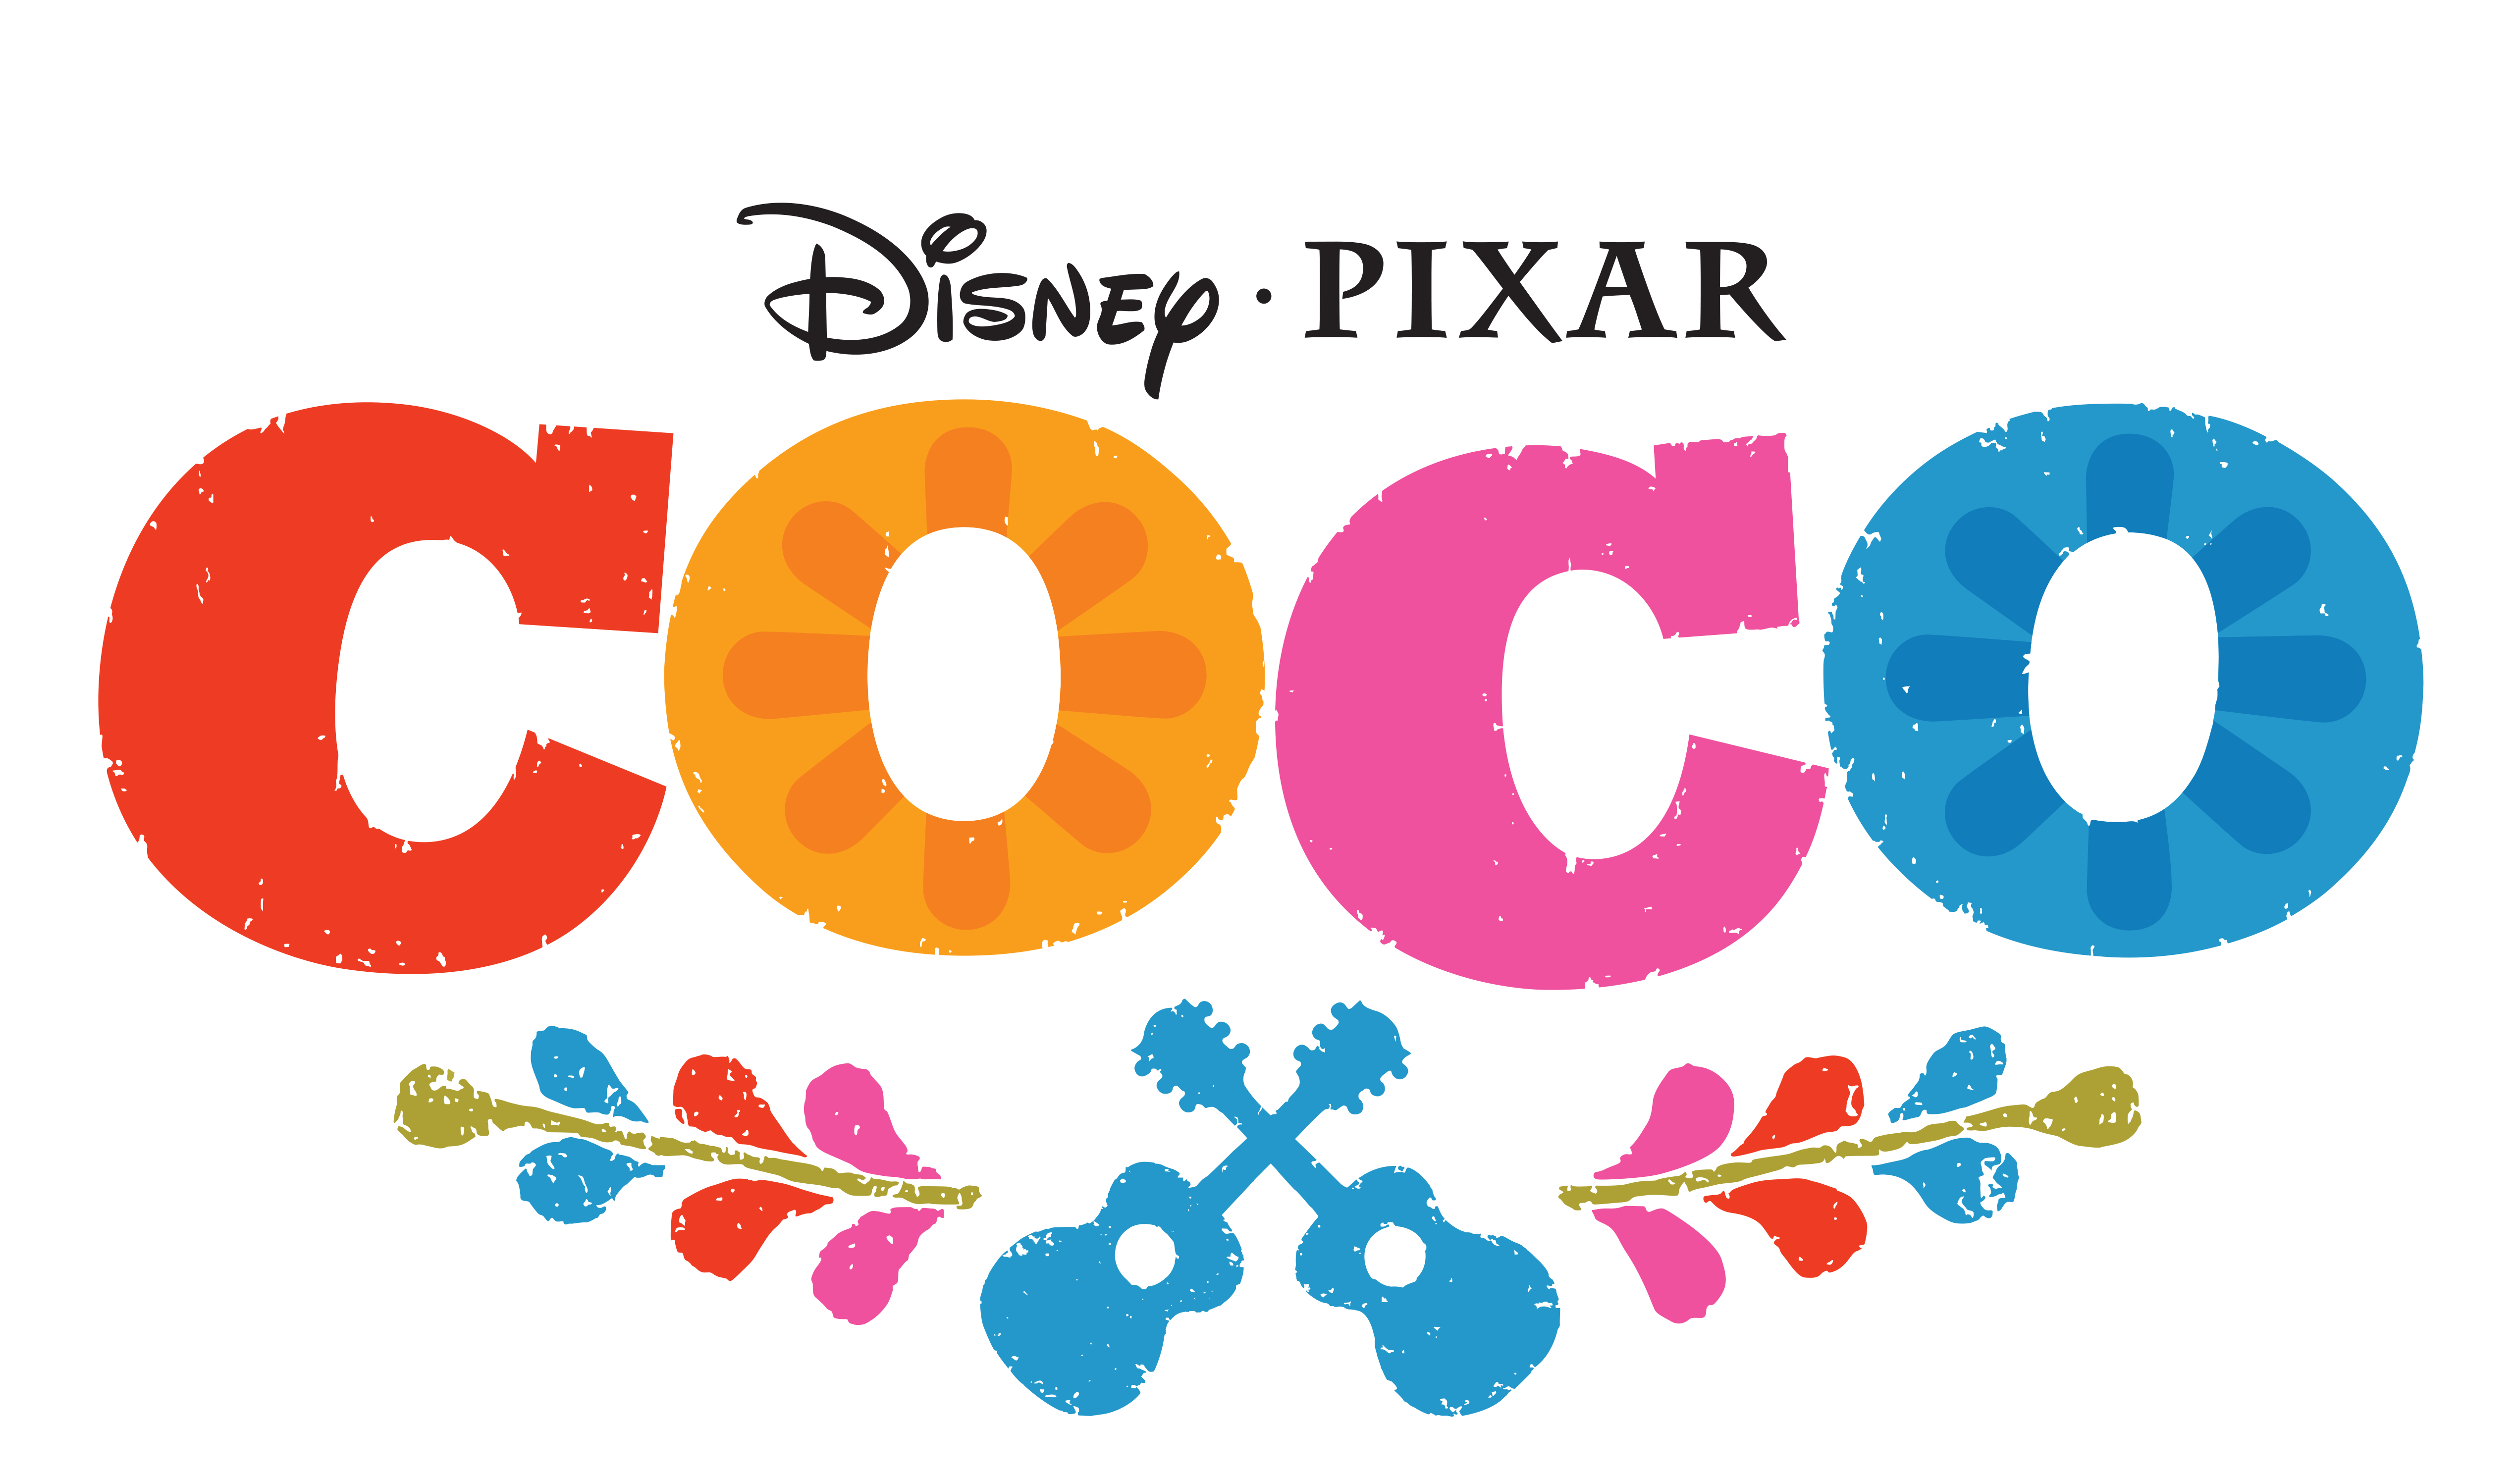 Pixar's 'Coco' is for the whole family